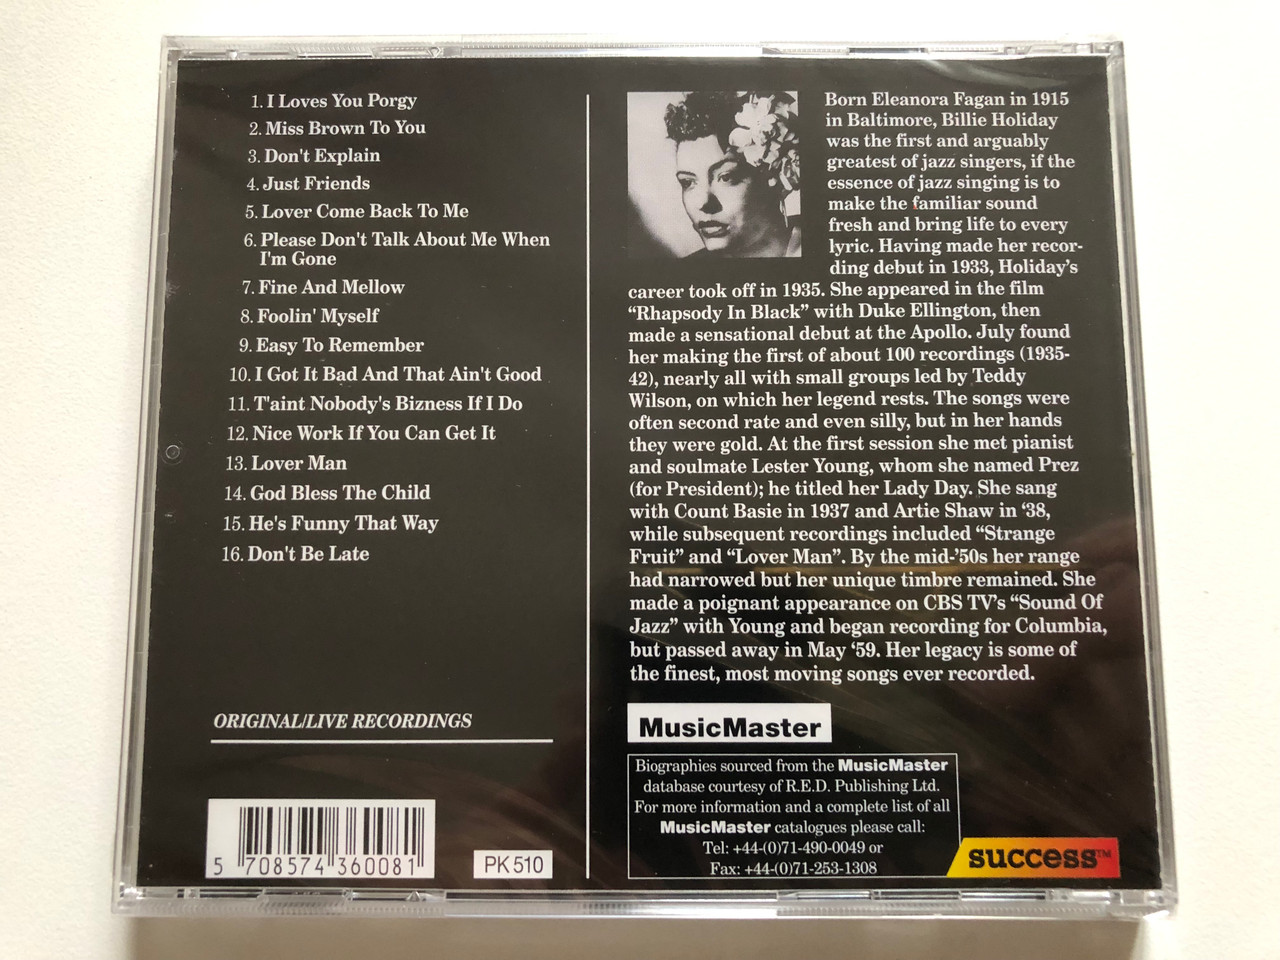 https://cdn10.bigcommerce.com/s-62bdpkt7pb/products/0/images/311280/Billie_Holiday_I_Loves_You_Porgy_Biographical_details_on_the_back_Success_Audio_CD_16008CD_2__69765.1699549171.1280.1280.JPG?c=2